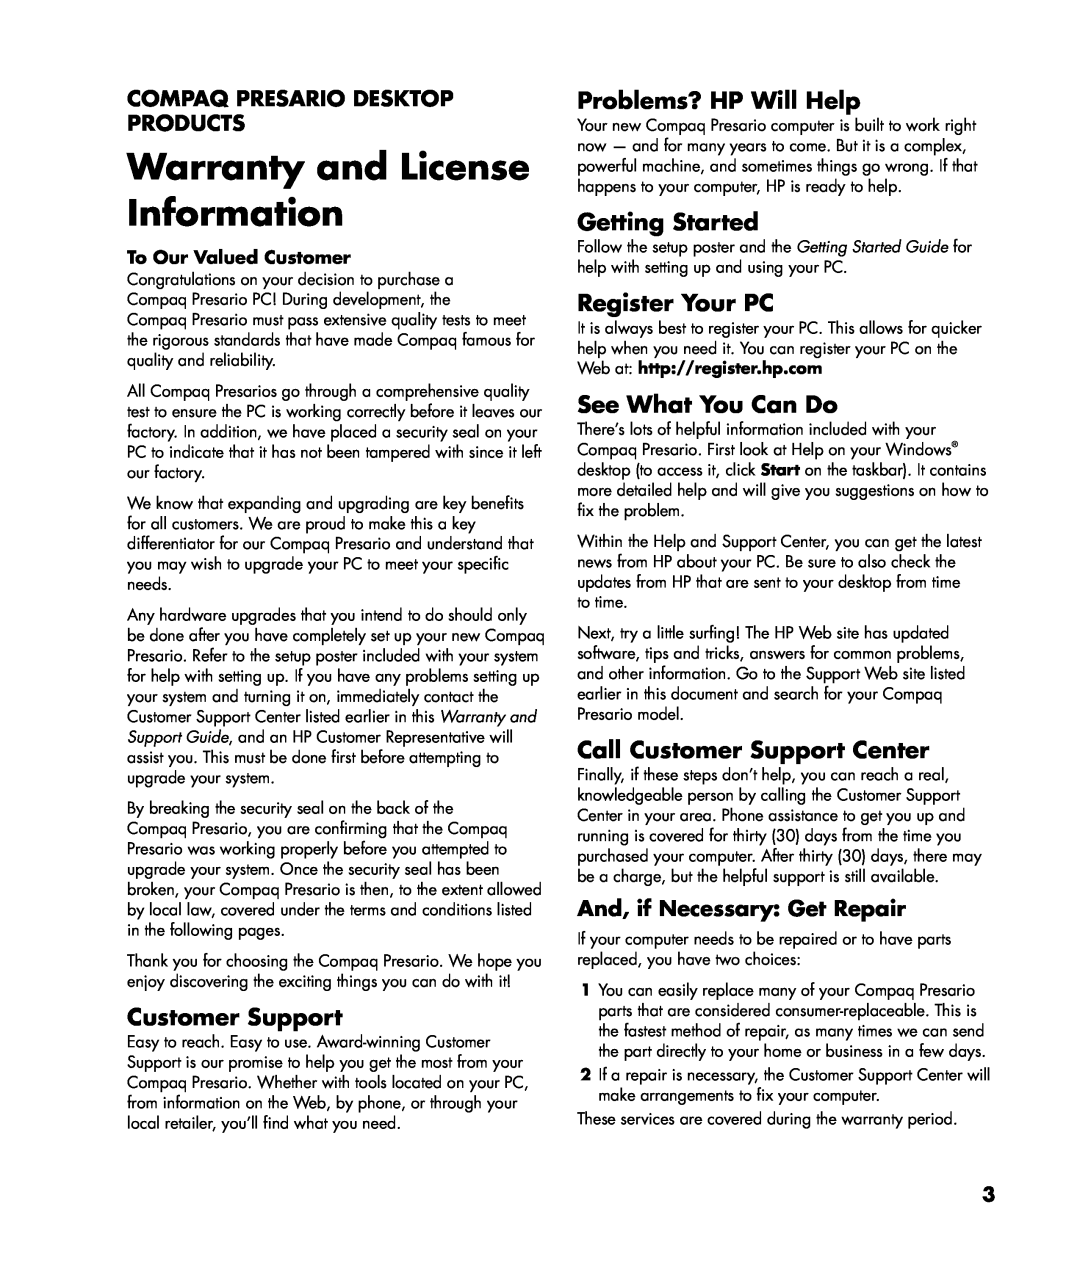 HP SR1620AP Warranty and License Information, Customer Support, Problems? HP Will Help, Getting Started, Register Your PC 